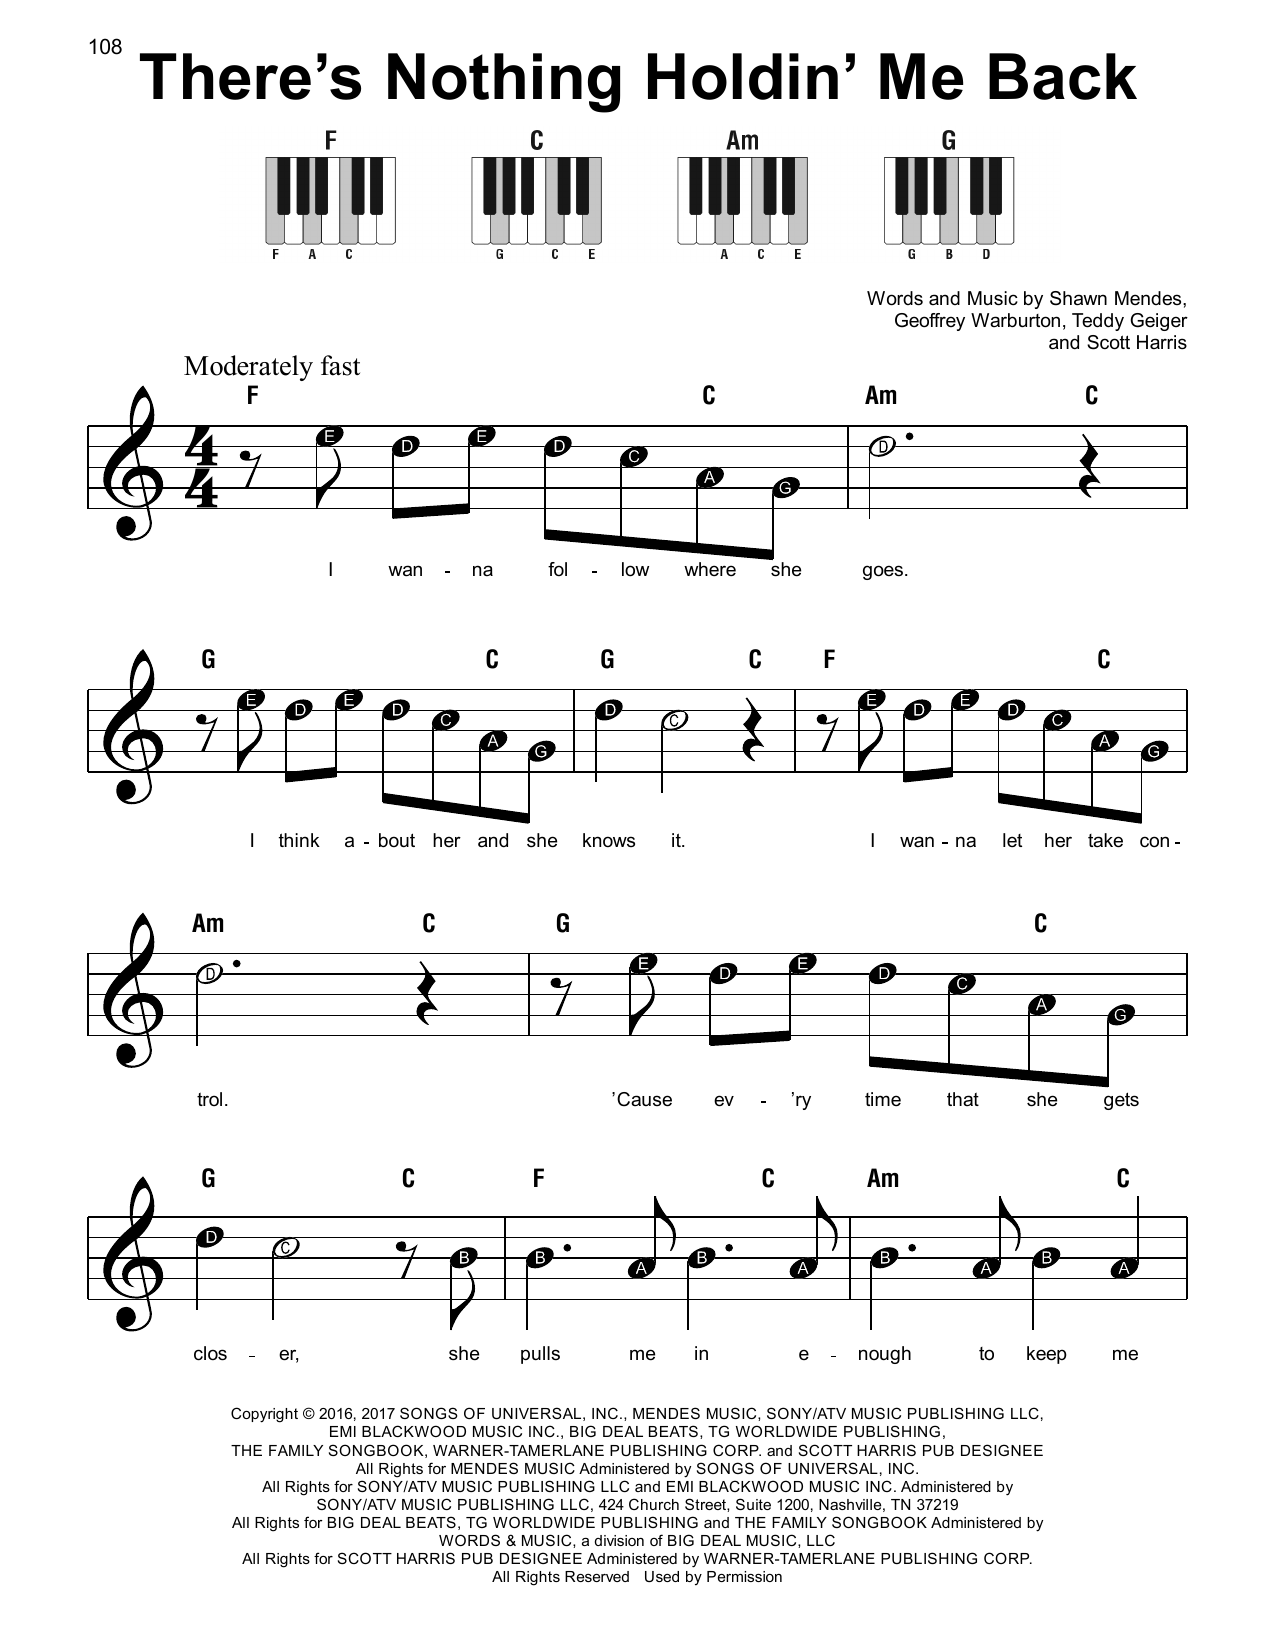 Download Shawn Mendes There's Nothing Holdin' Me Back Sheet Music